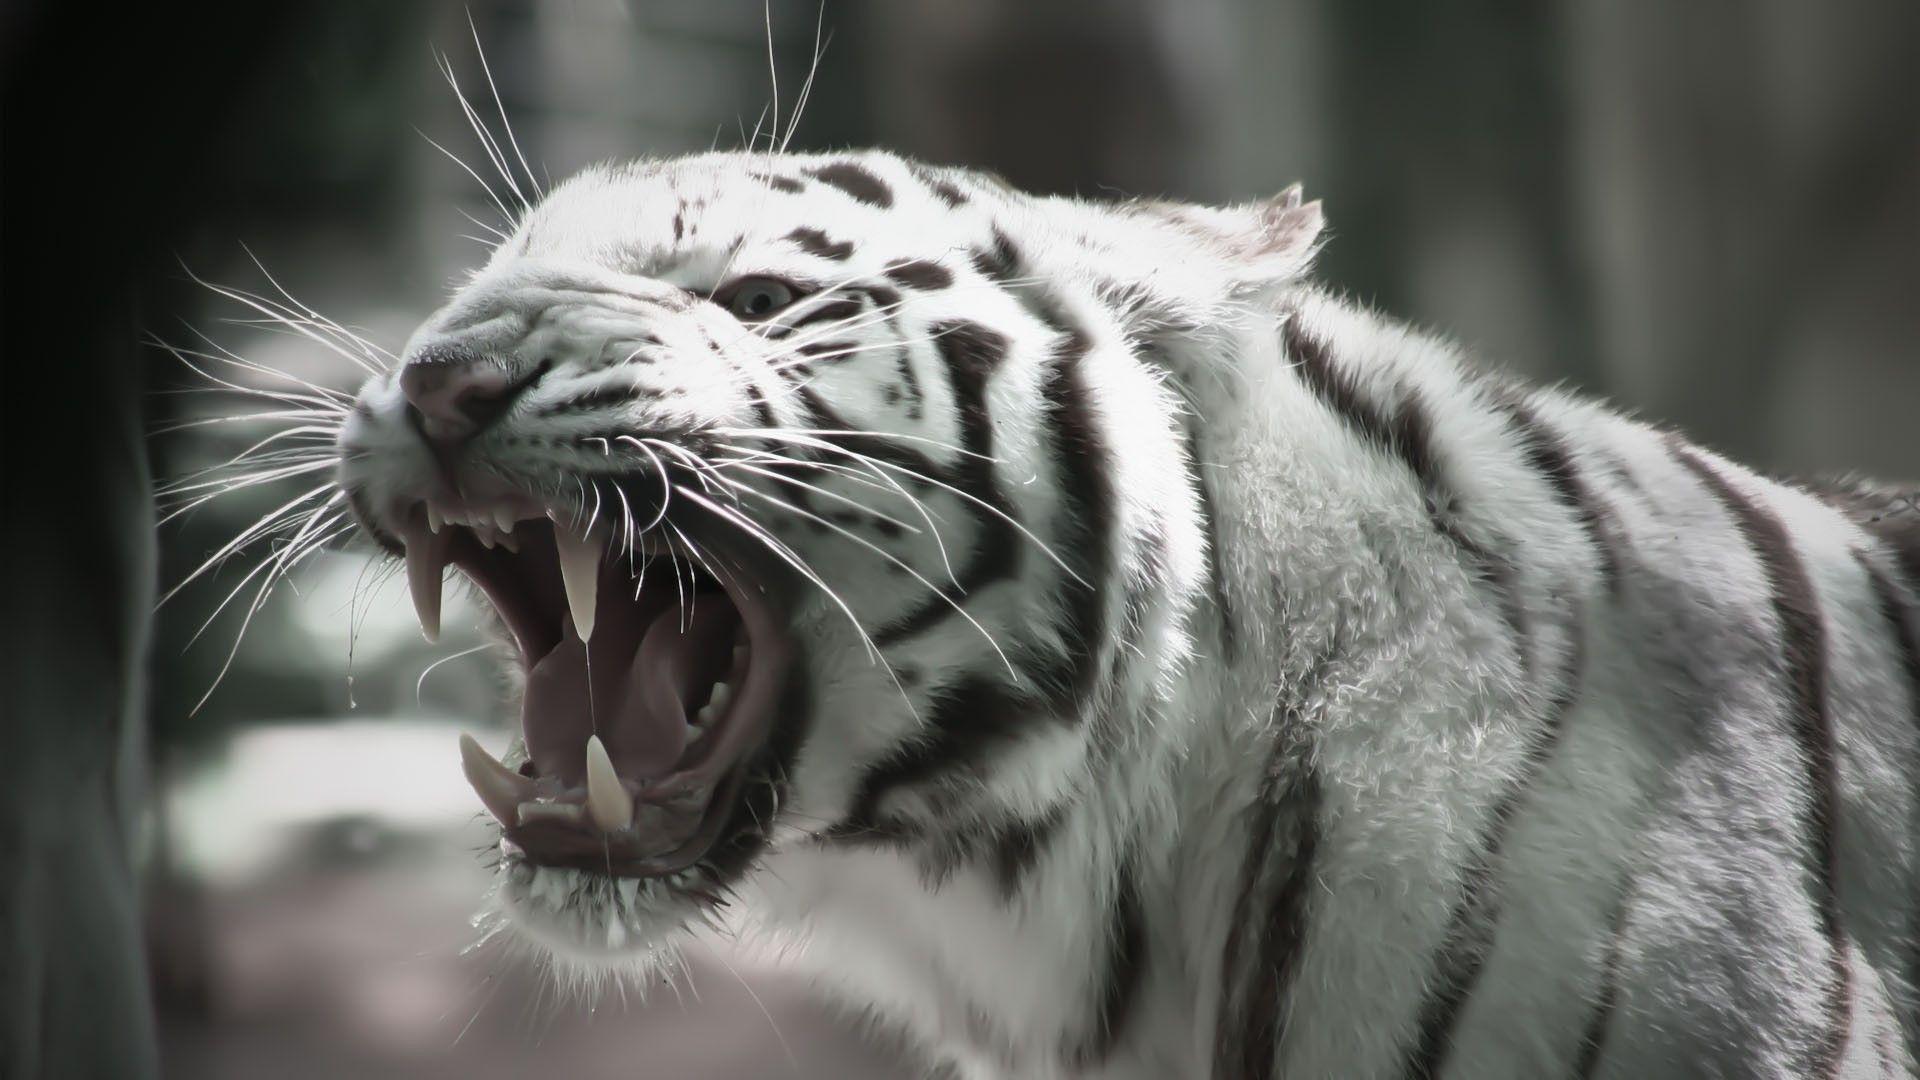 White Tiger Wallpapers Hd Free Download > SubWallpapers